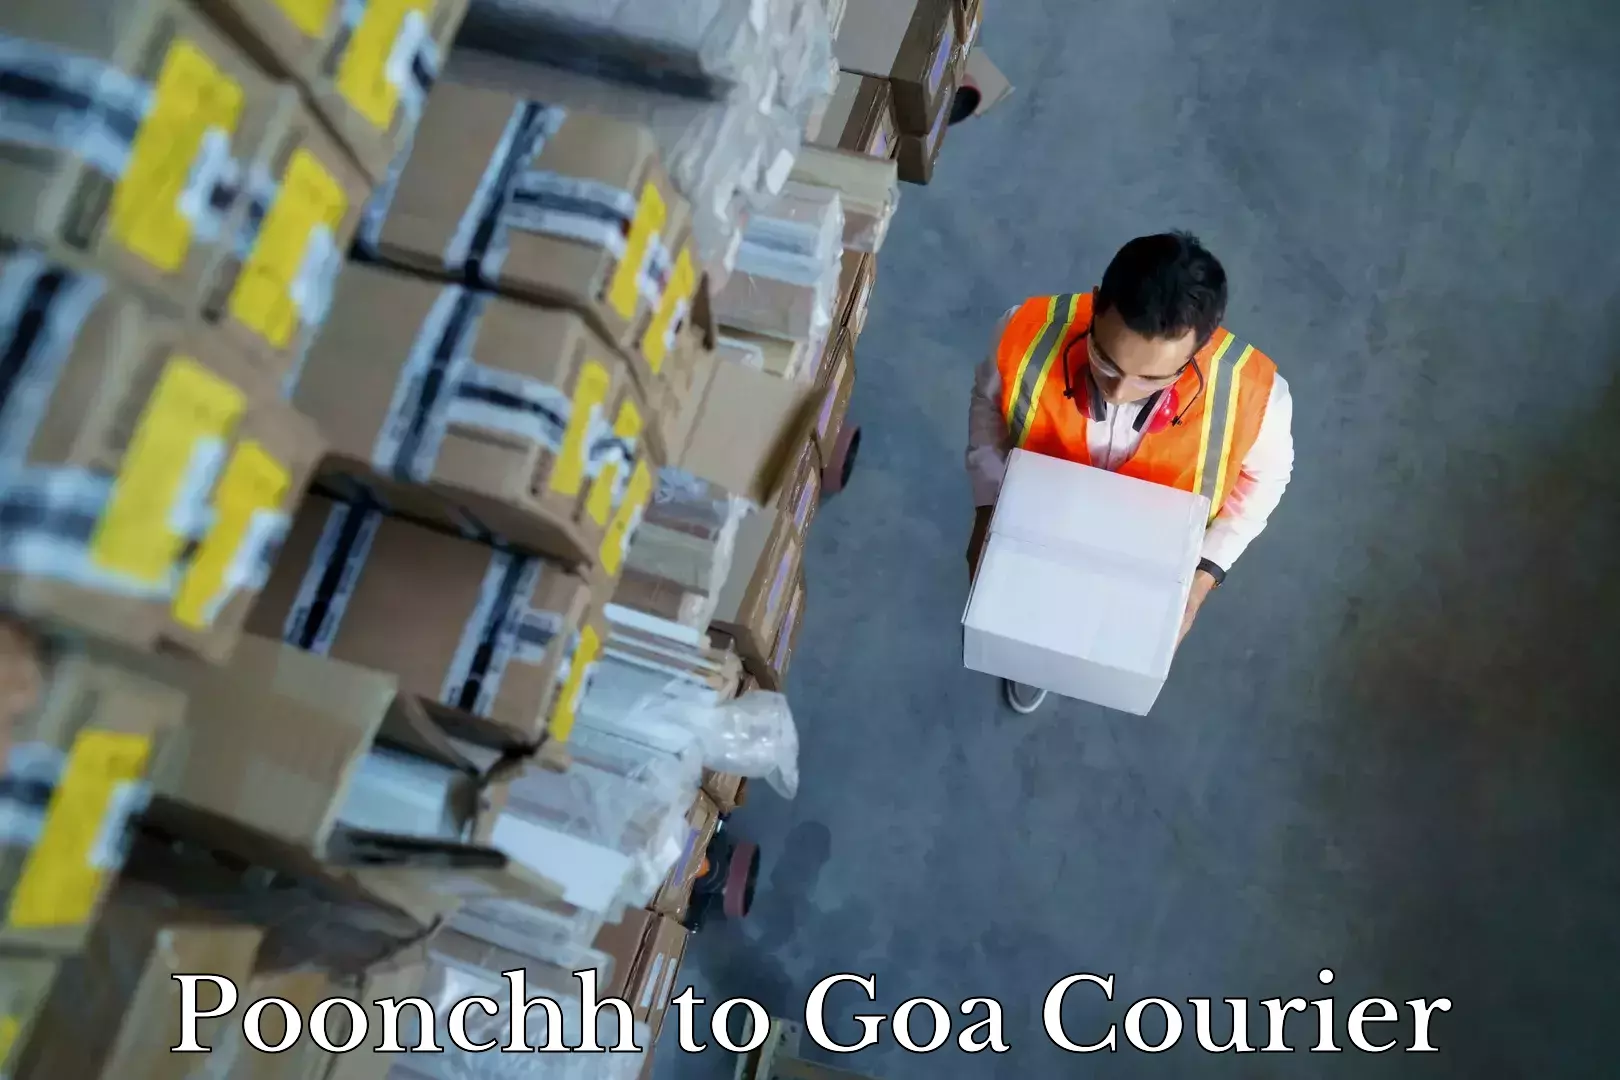 Furniture delivery service Poonchh to Goa University